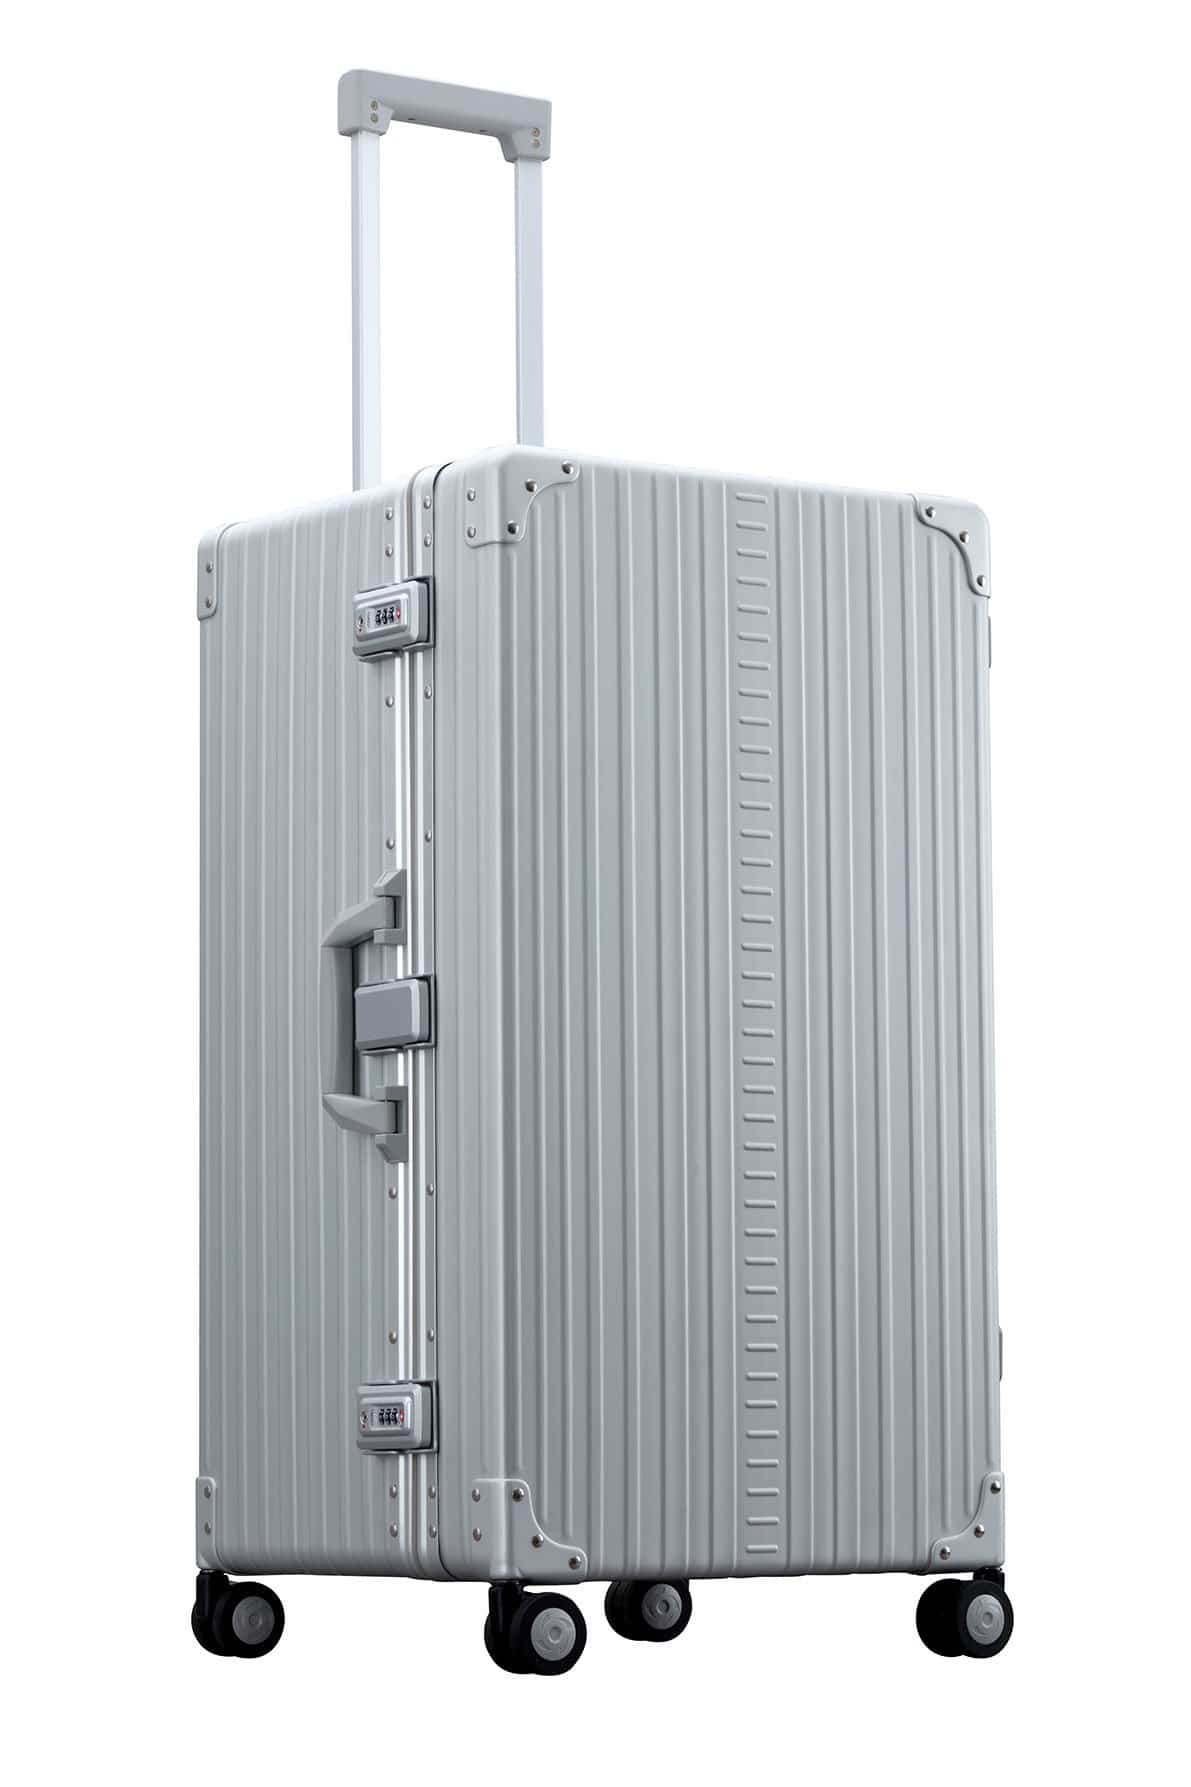 Understanding the Differences between Hardside & Softside Luggage